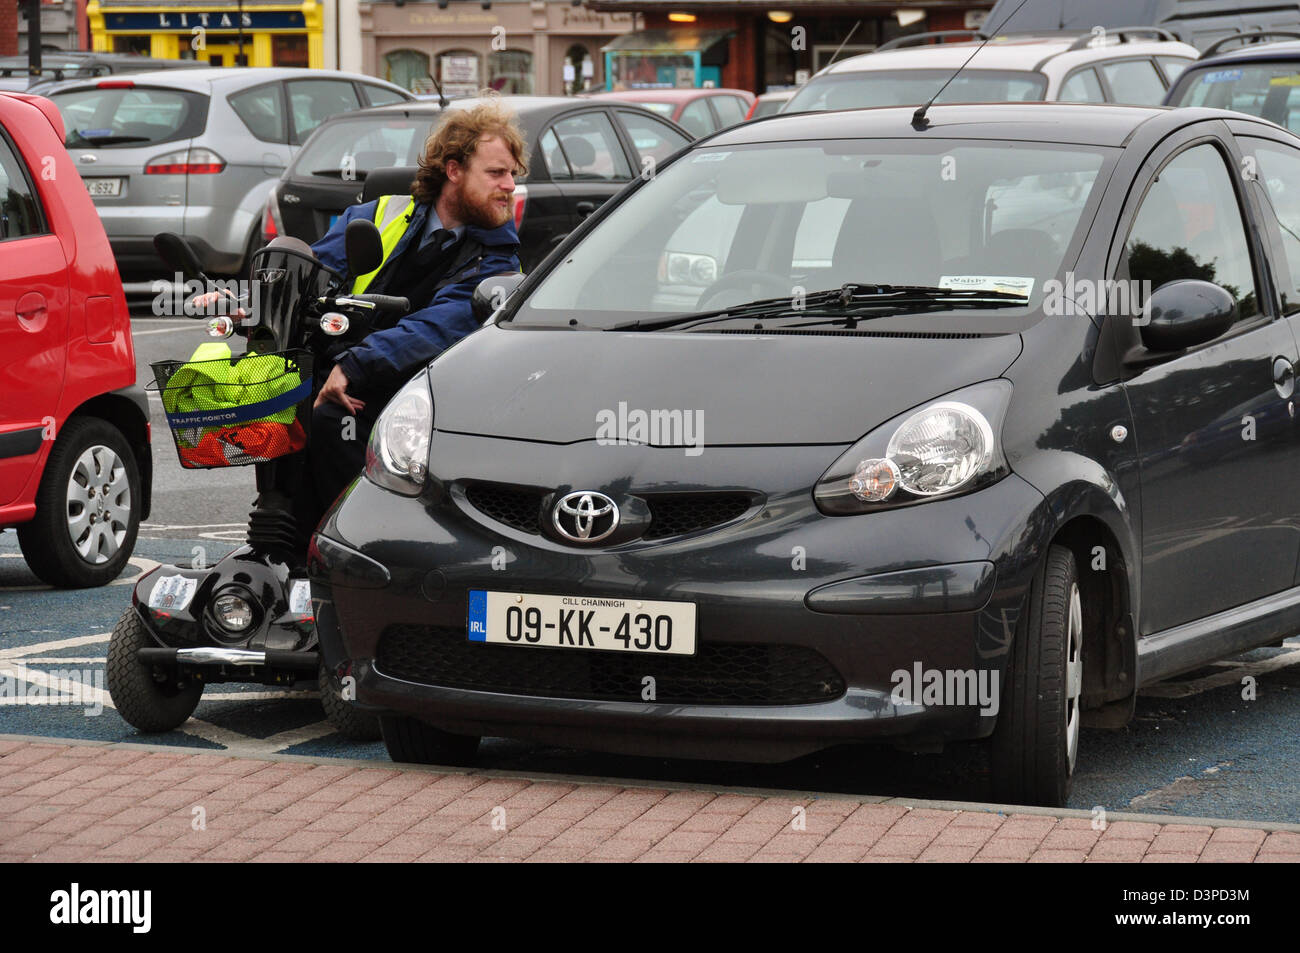 A disabled traffic warden at work in kilkenny ireland Stock Photo